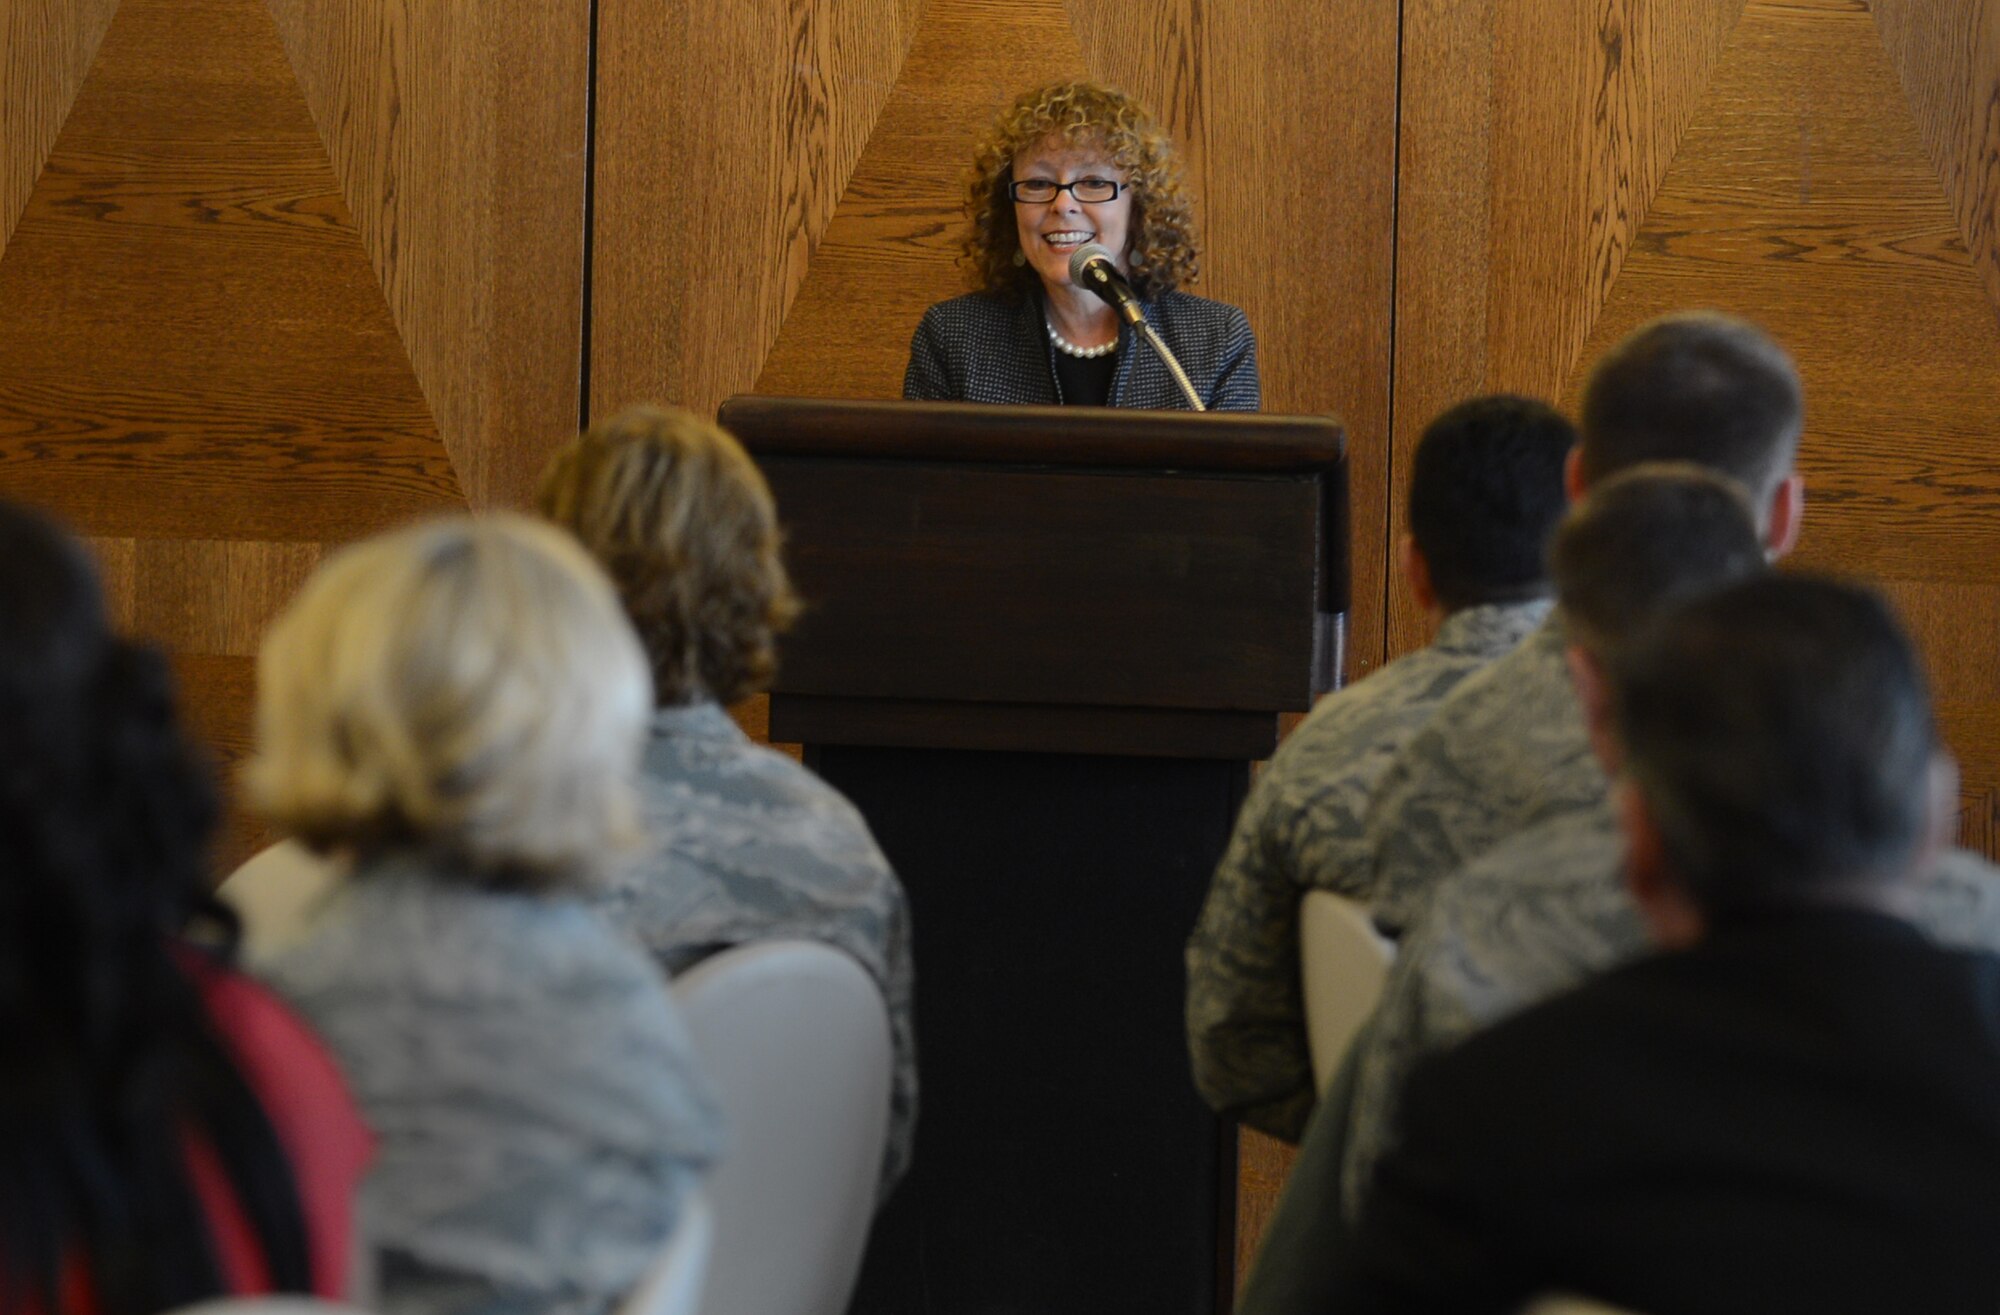 Dr. Dell W. McMullen, Kaiserslautern district superintendent, speaks to Airman during the Kaiserslautern Military Community Woman’s History Month luncheon on Ramstein Air Base, Germany, March 19, 2013. Ever since 1987, the month of March has been set aside to recognize and celebrate the multi-cultural history of American women in schools, work places and communities throughout the country. The theme of the luncheon was celebrating women in science, technology, engineering and mathematics. (U.S. Air Force photo/ Senior Airman Caitlin O’Neil-McKeown)